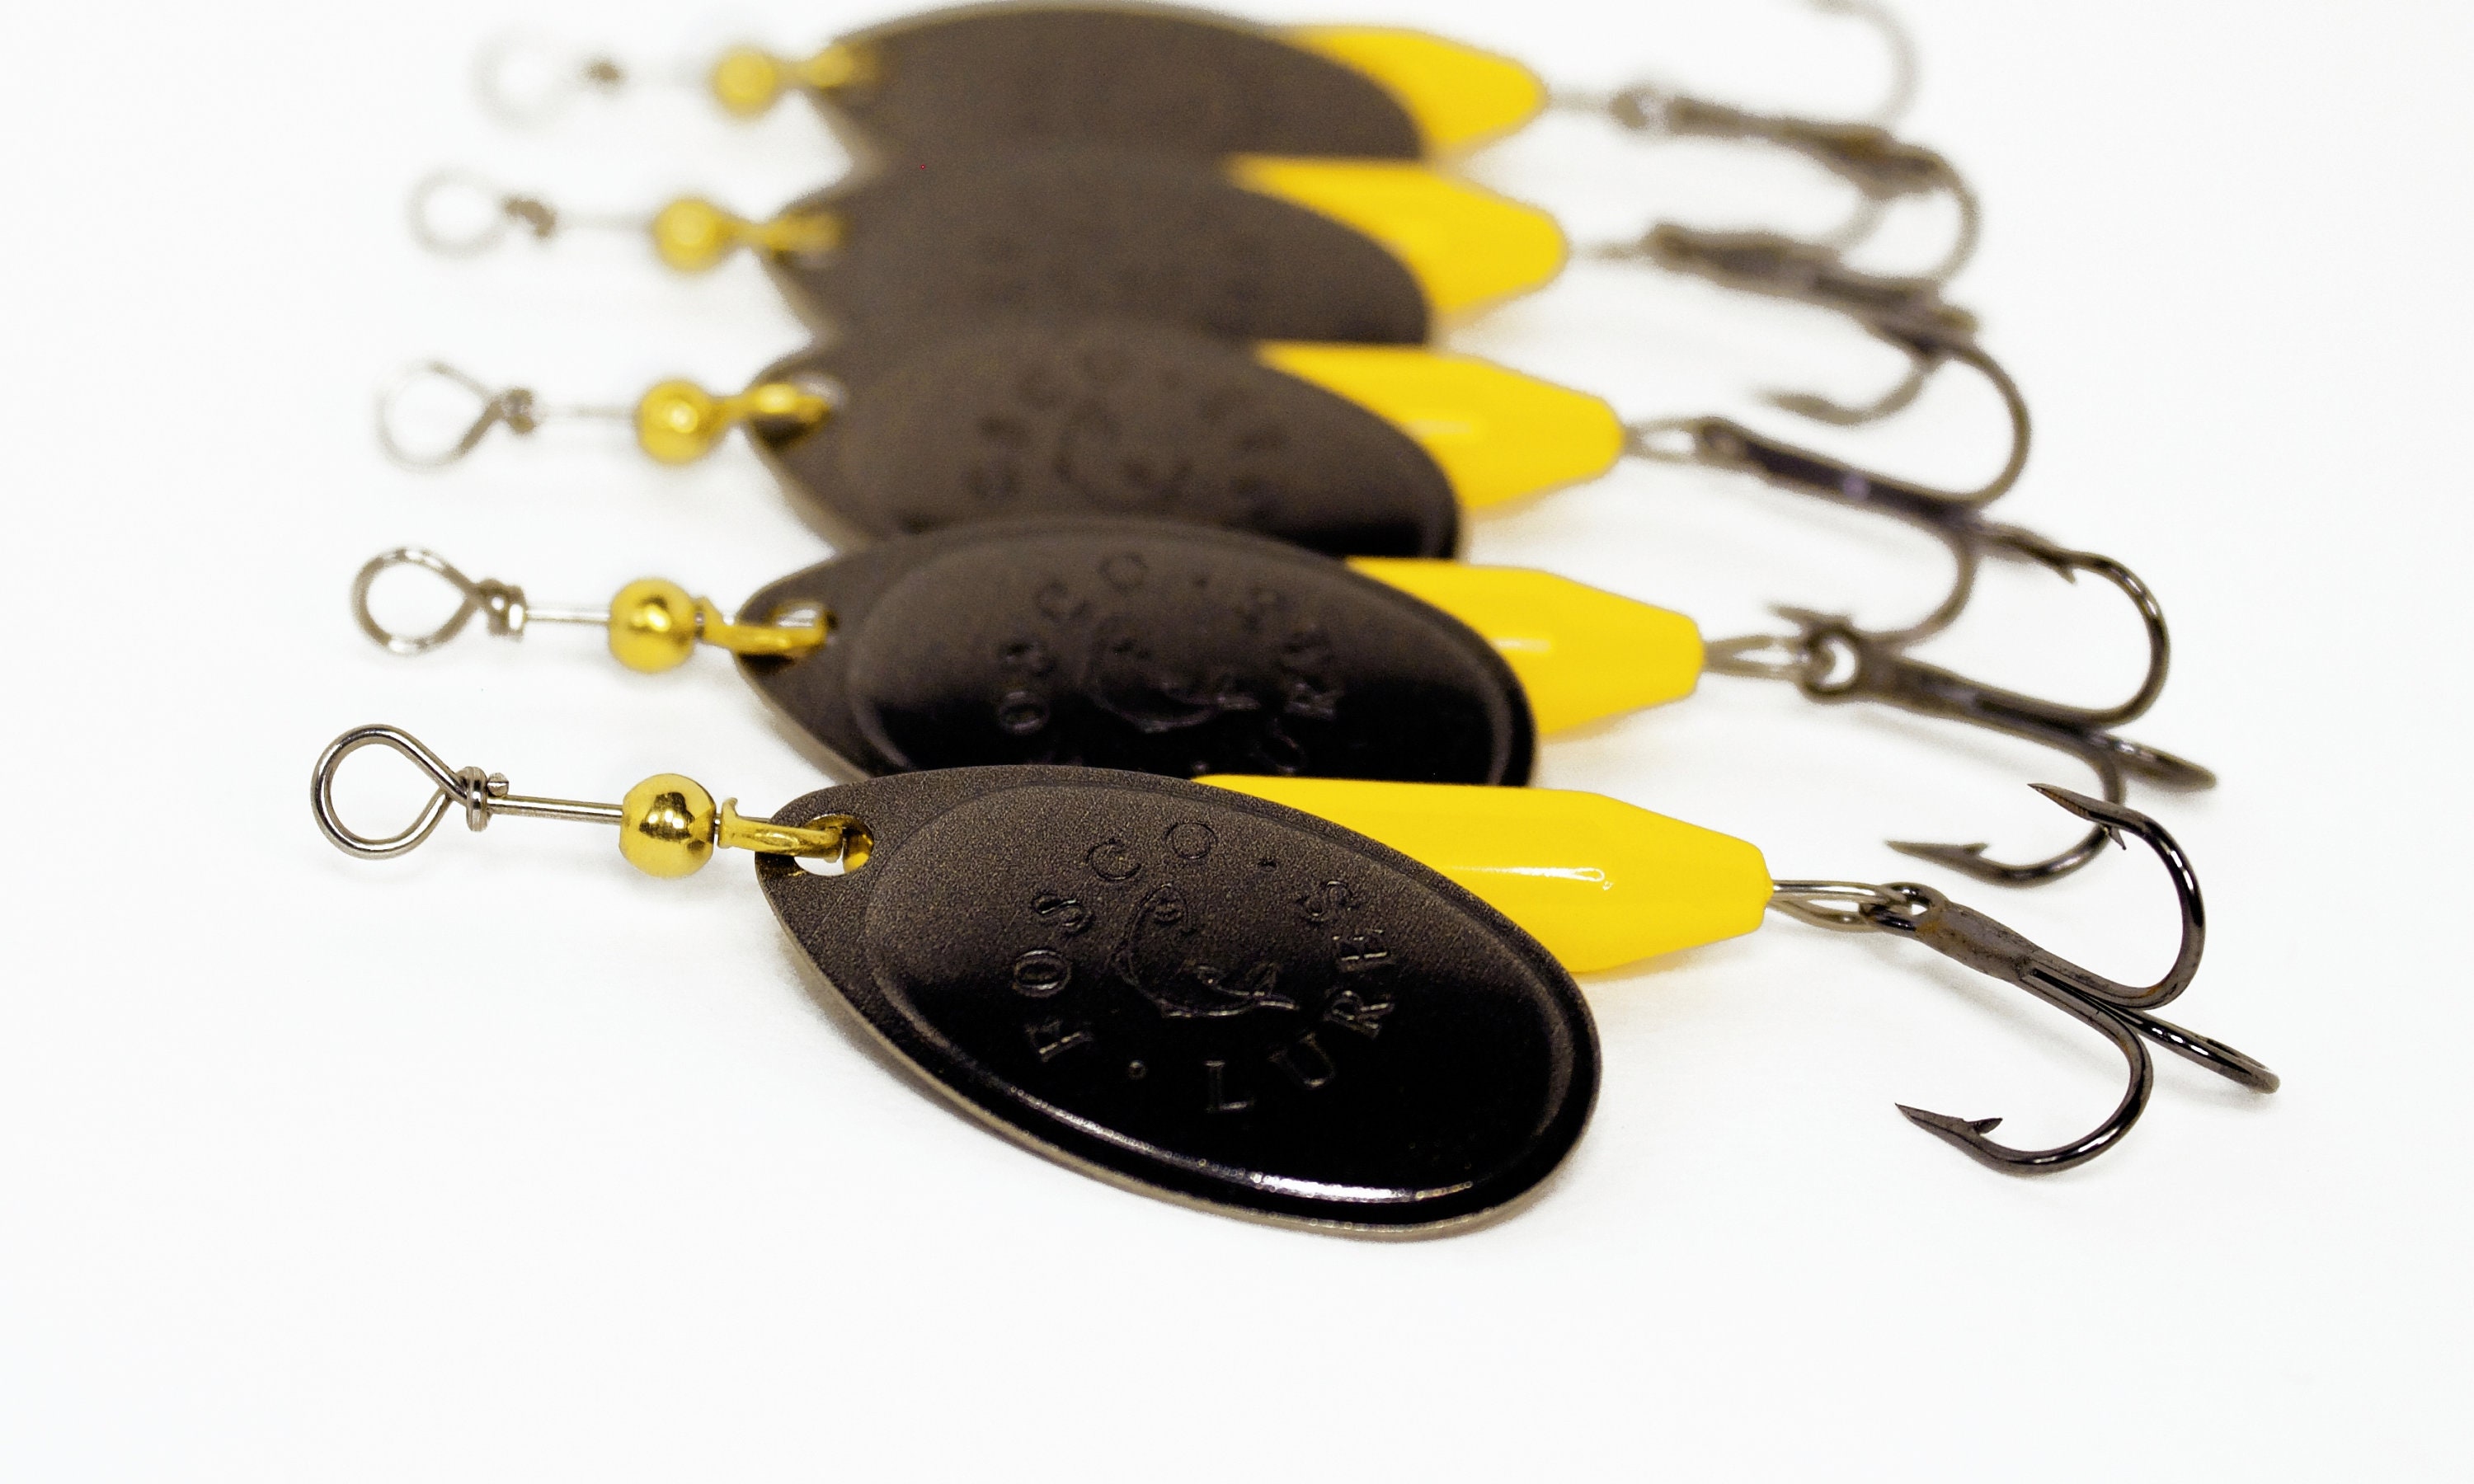 Handmade Spinner Fishing Lure Yellow W/ Black Blade Inline Spinner Made in Canada  Trout Salmon Bass Pike Perch Walleye Fishing Gift 